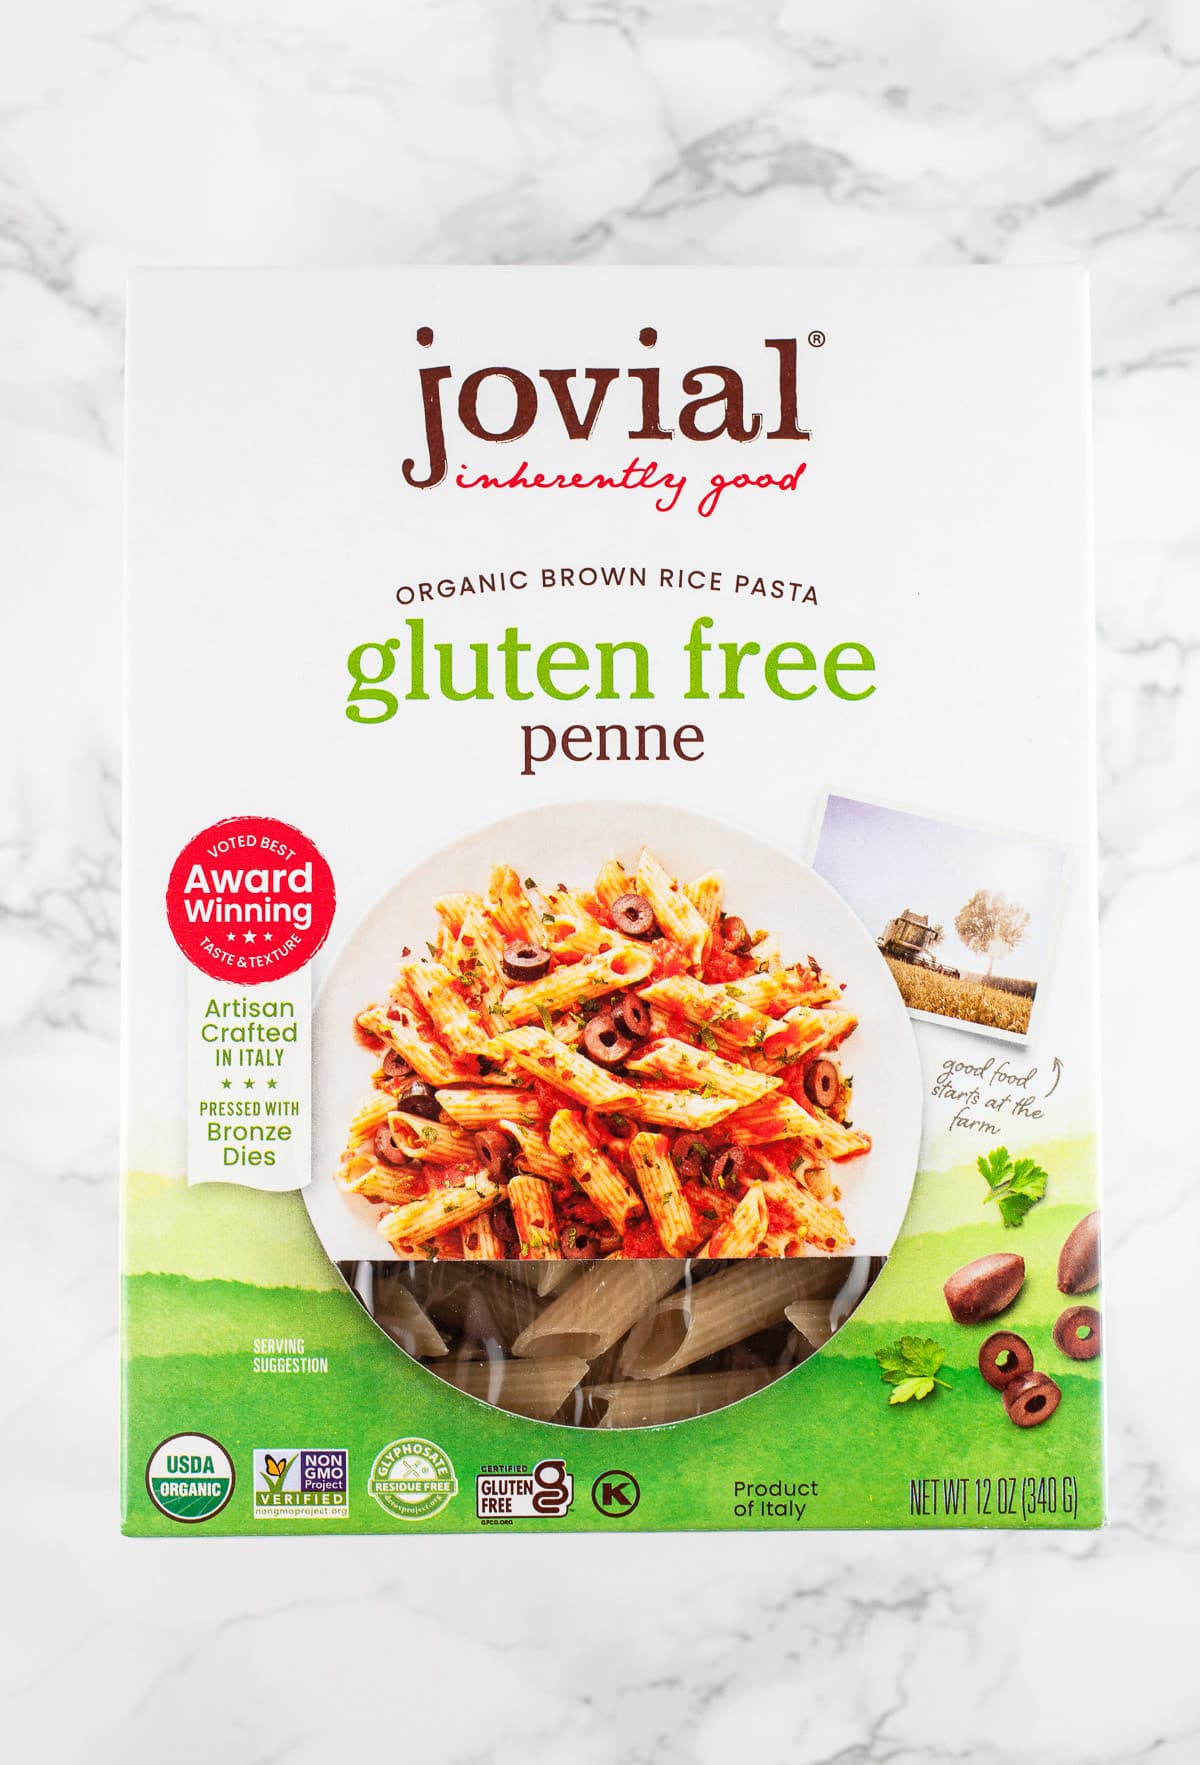 Unopened box of Jovial penne pasta on white surface.